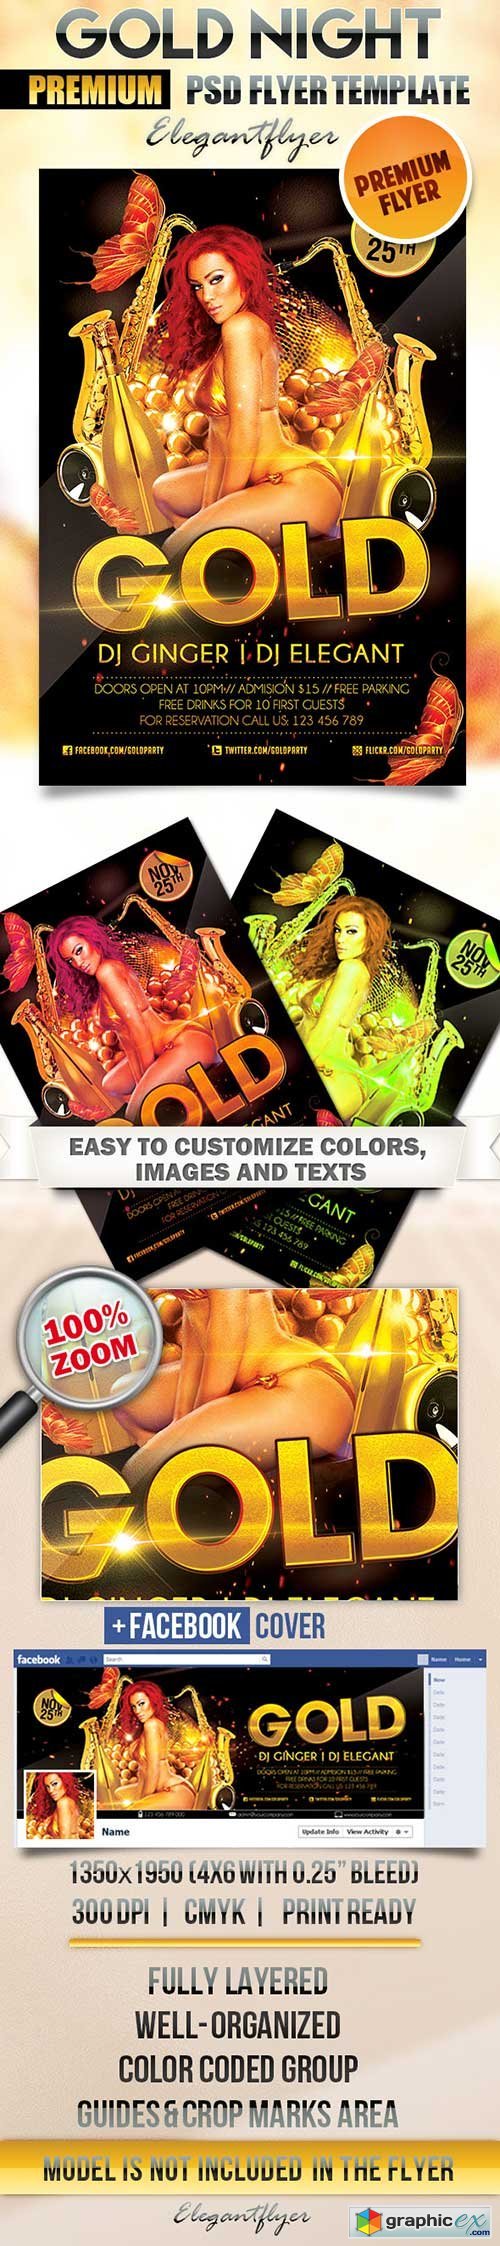 Gold Night Flyer PSD Template + Facebook Cover